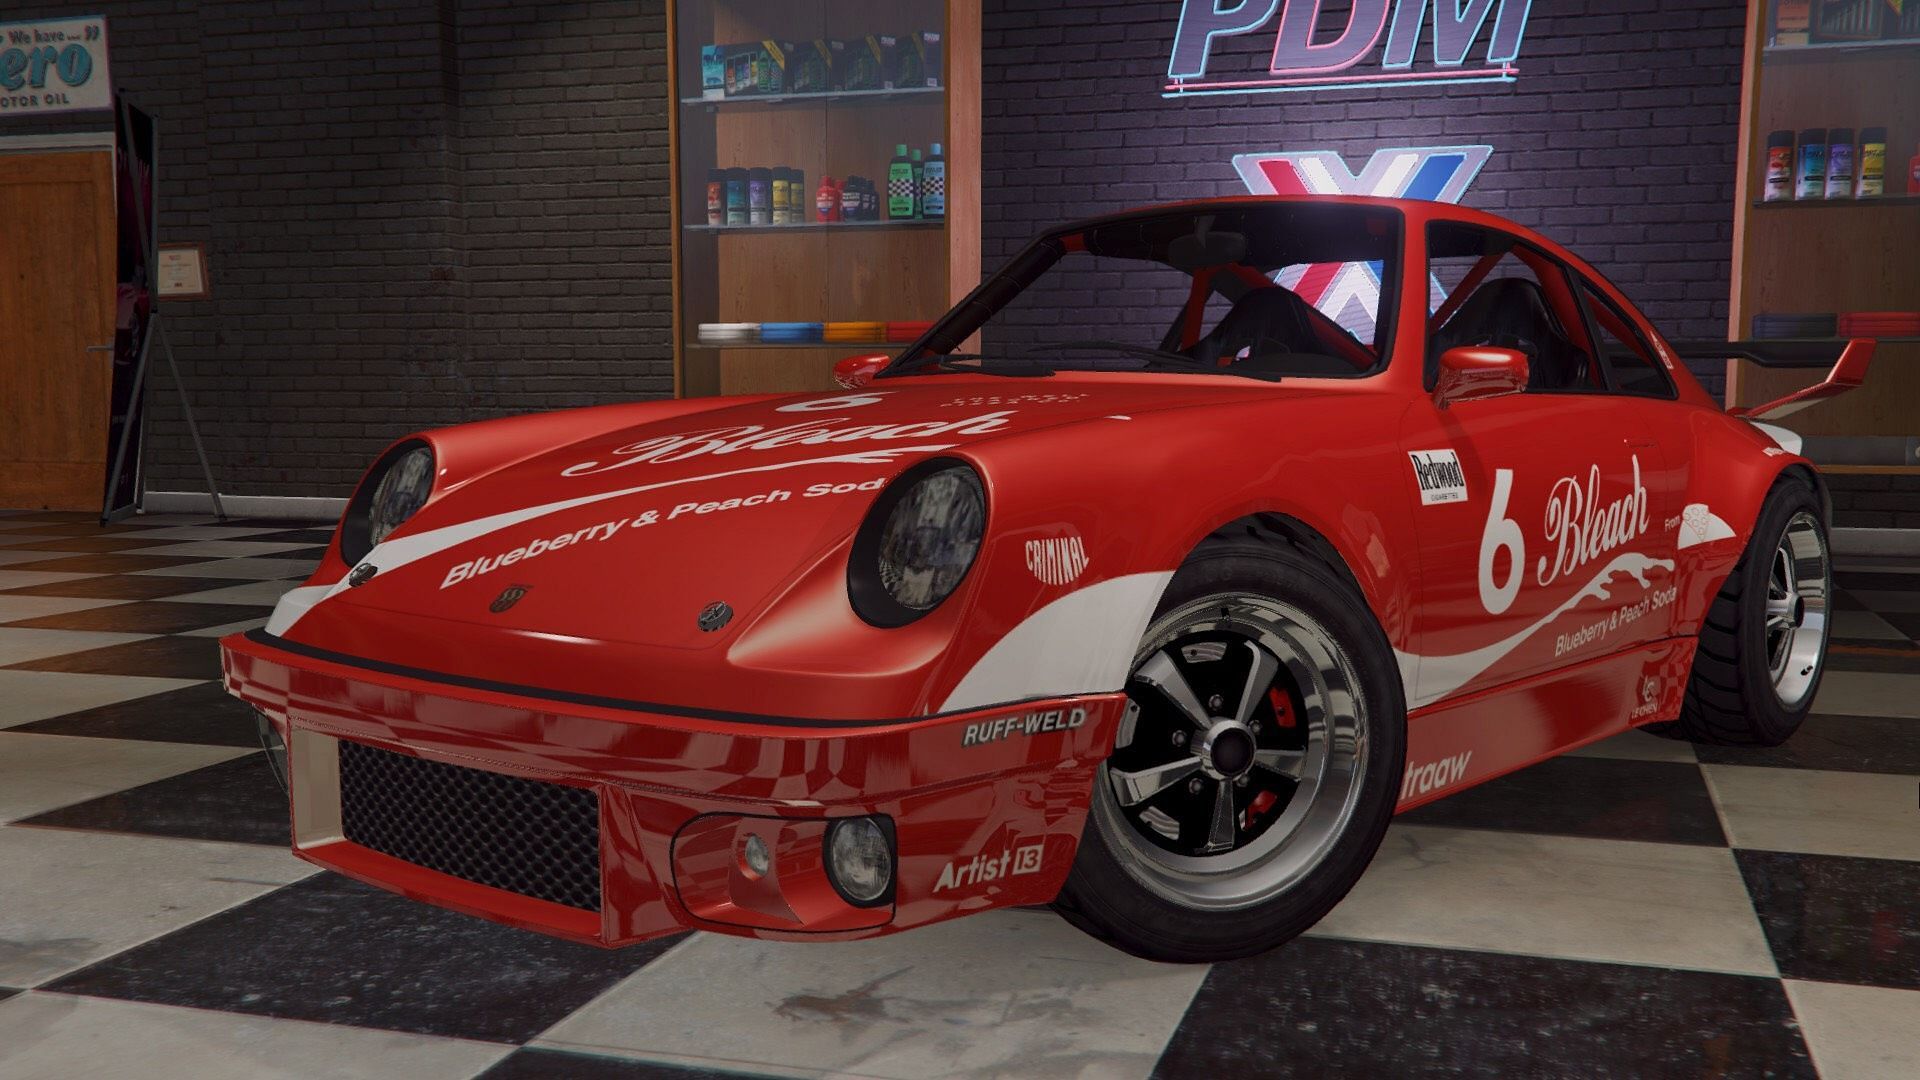 A screenshot of the non-wide body of the car that players can get through the mod (Image via gta5-mods.com)